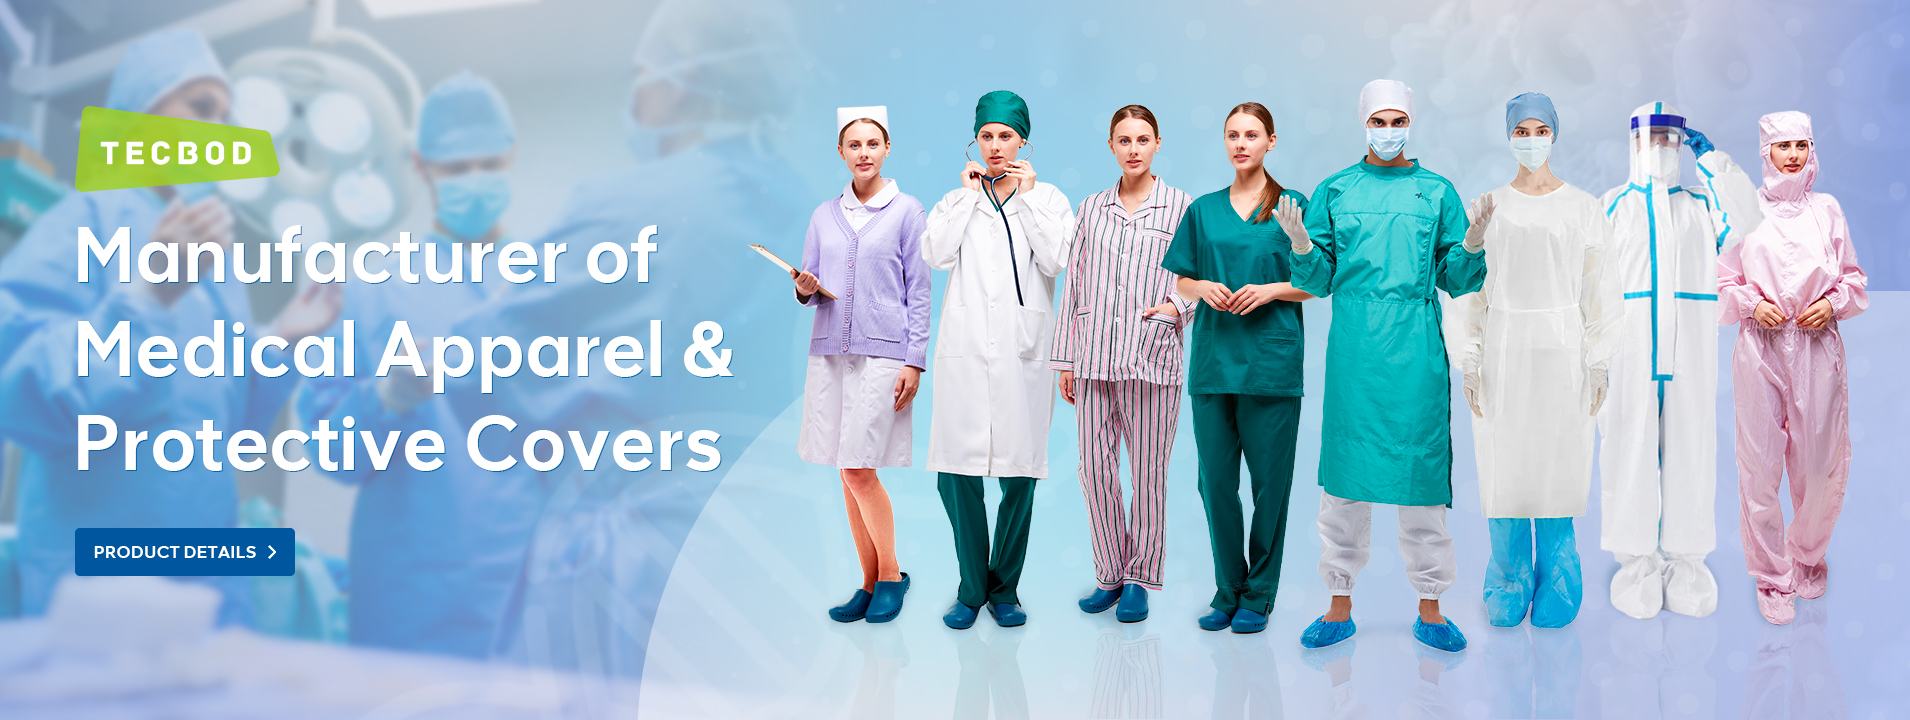 Manufacturer of Medical Apparel & Protective Covers